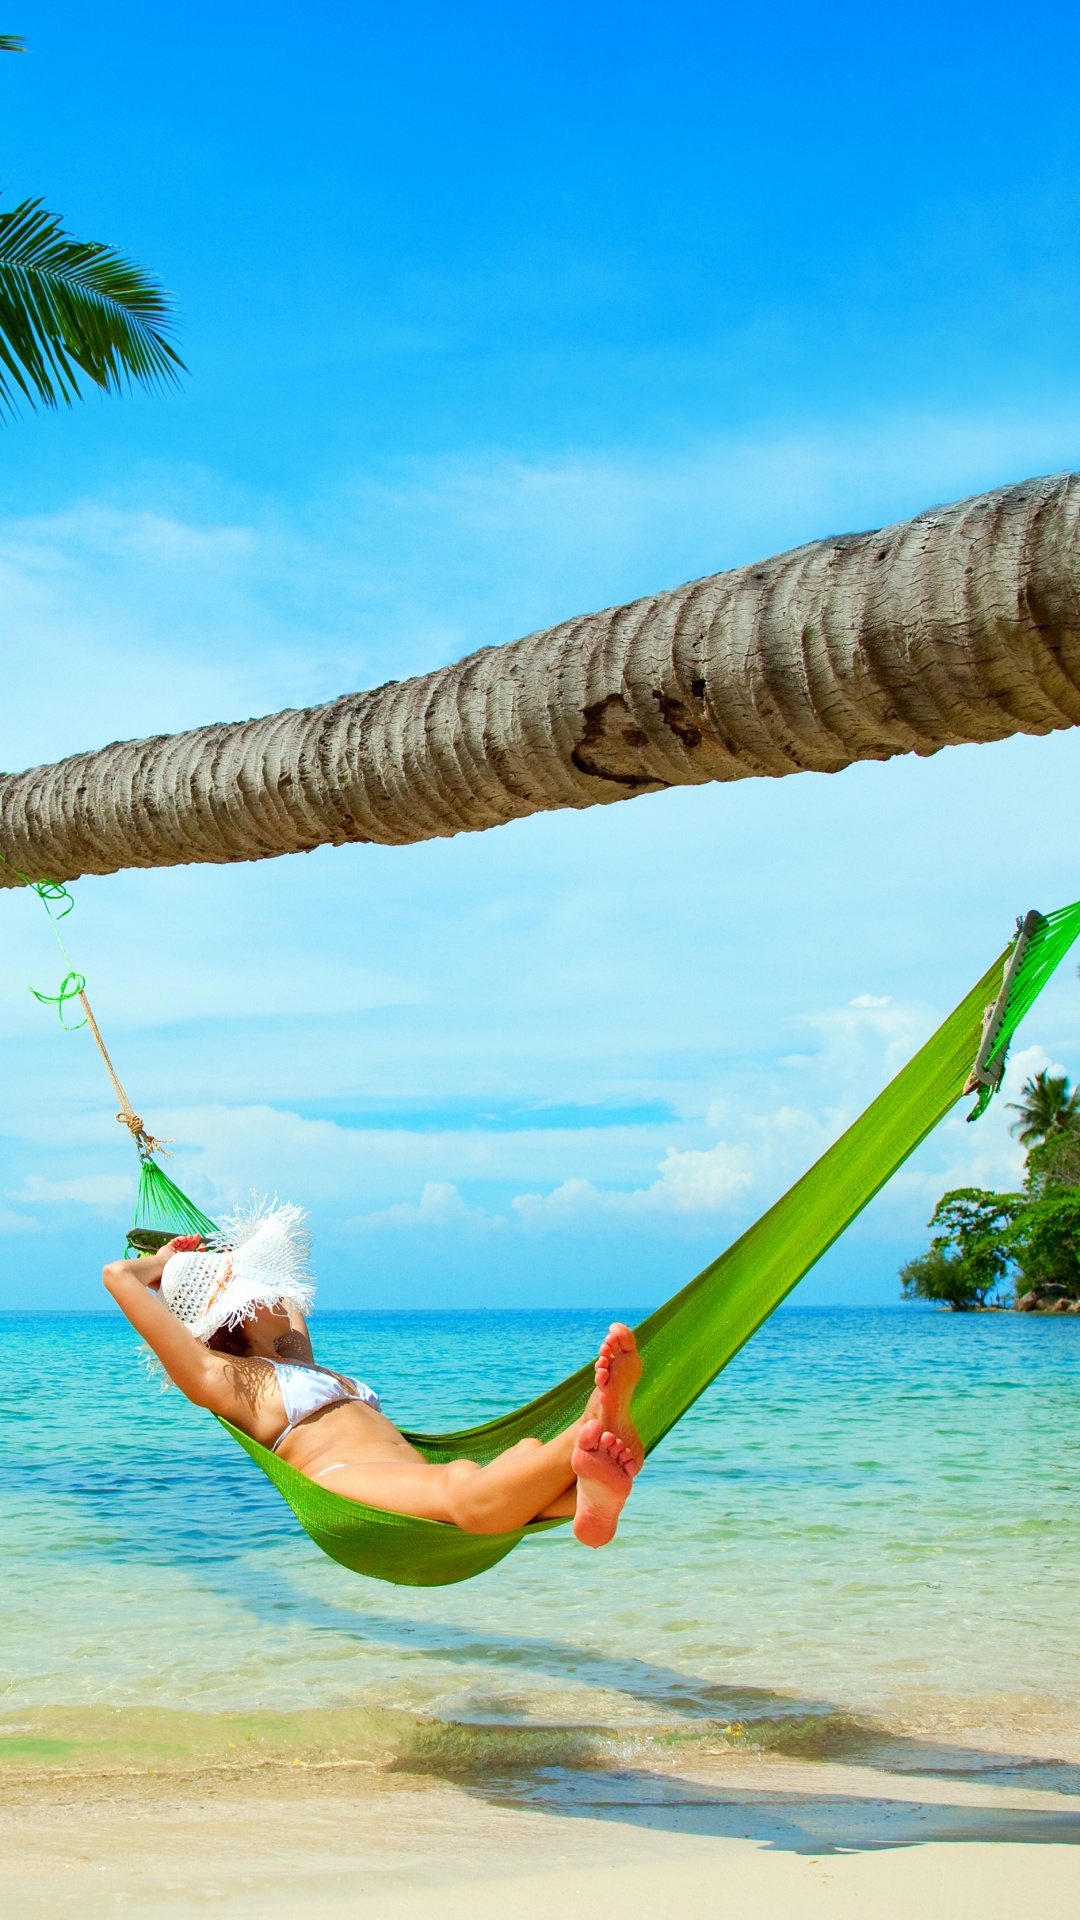 Woman in White Shirt and Green Shorts Lying on Hammock Under Coconut Tree During Daytime. Wallpaper in 1080x1920 Resolution